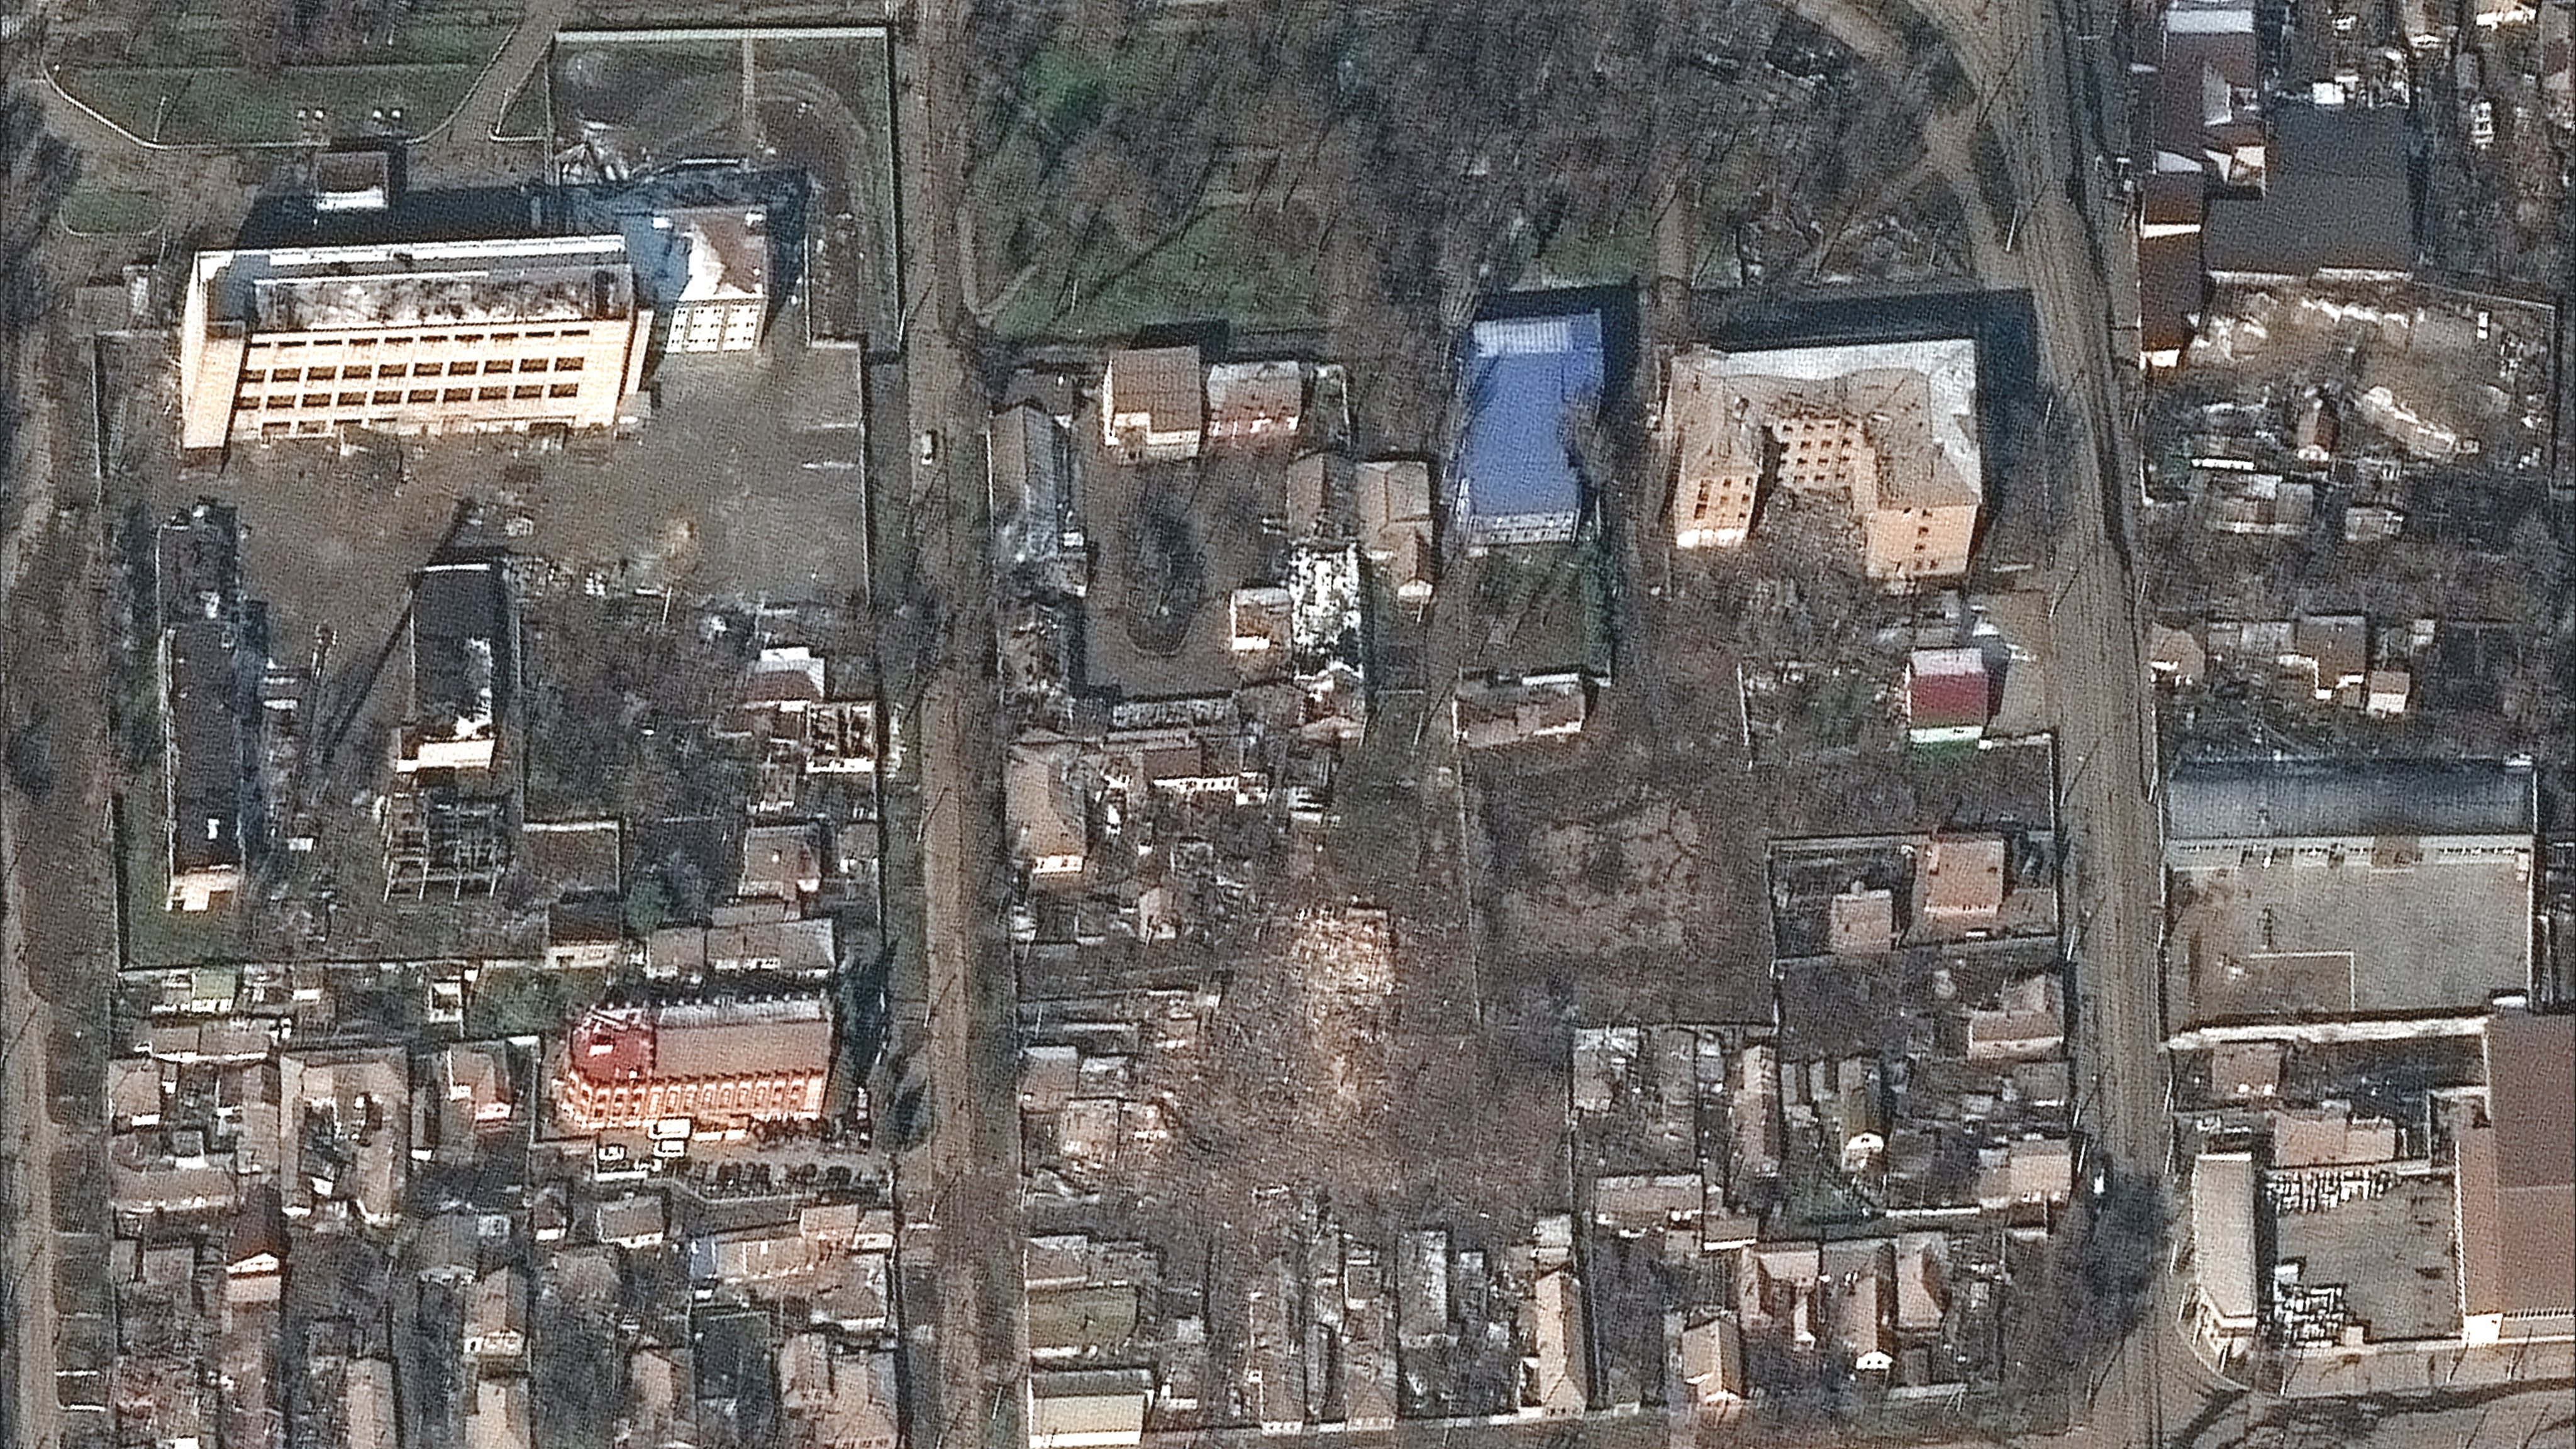 RUSSIANS INVADE UKRAINE -- MARCH 9, 2022:  02 Maxar satellite imagery of buildings and homes AFTER invasion Mariupol, Ukraine.  9mar2022_wv3.  Please use: Satellite image (c) 2022 Maxar Technologies.